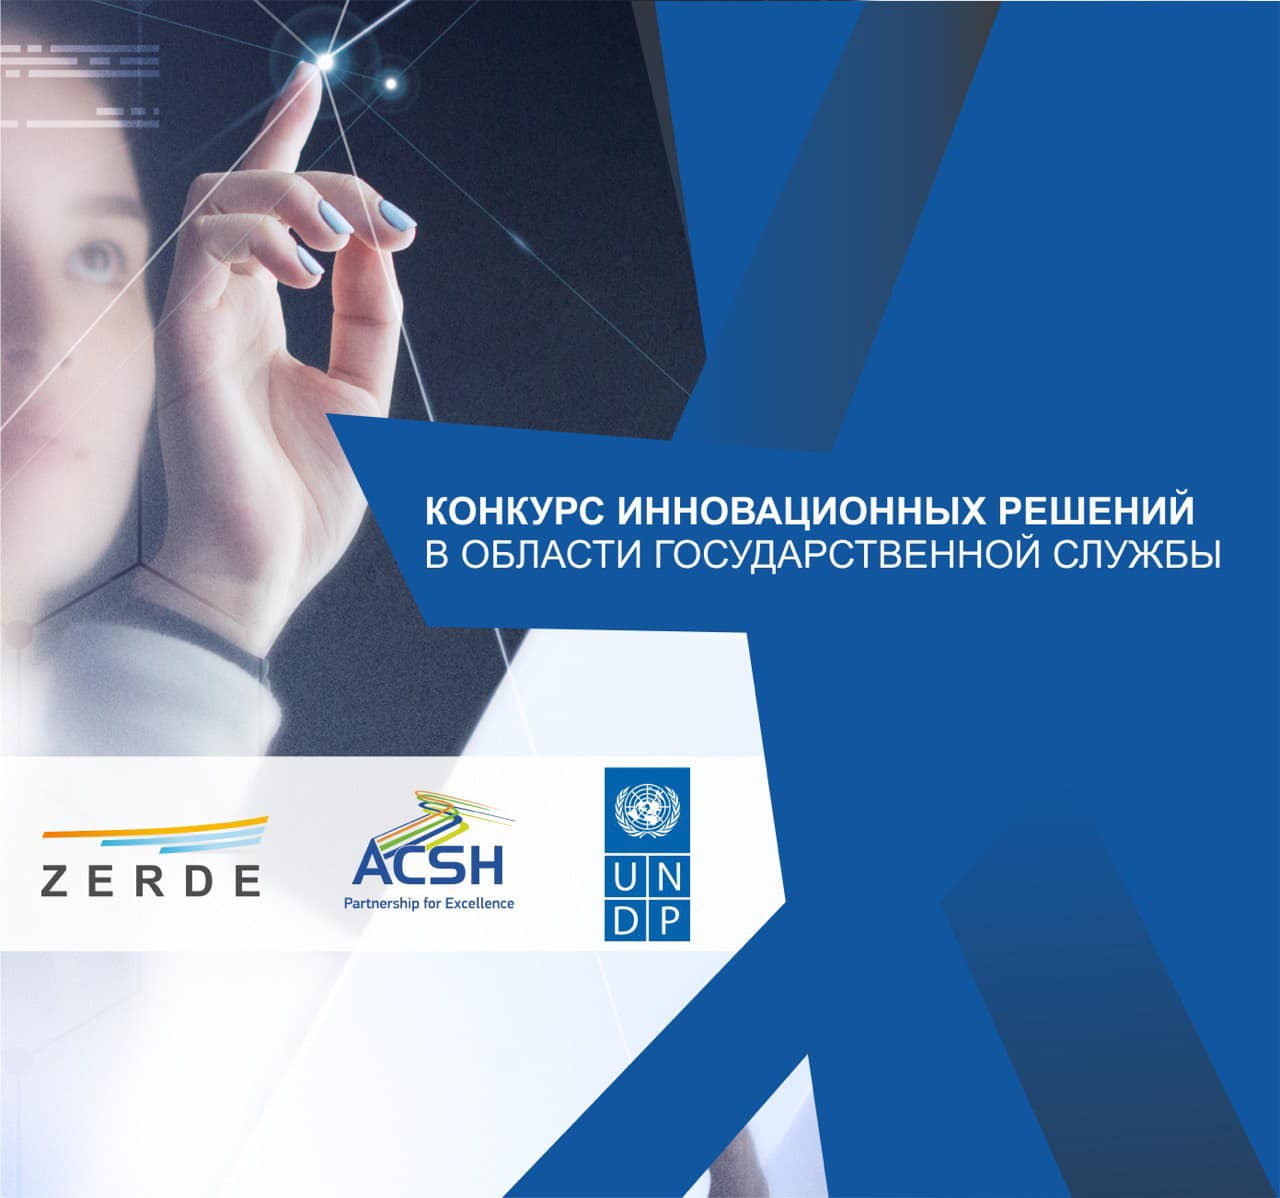 ACSH and Holding “Zerde” are launching a project to find innovative solutions in the public service